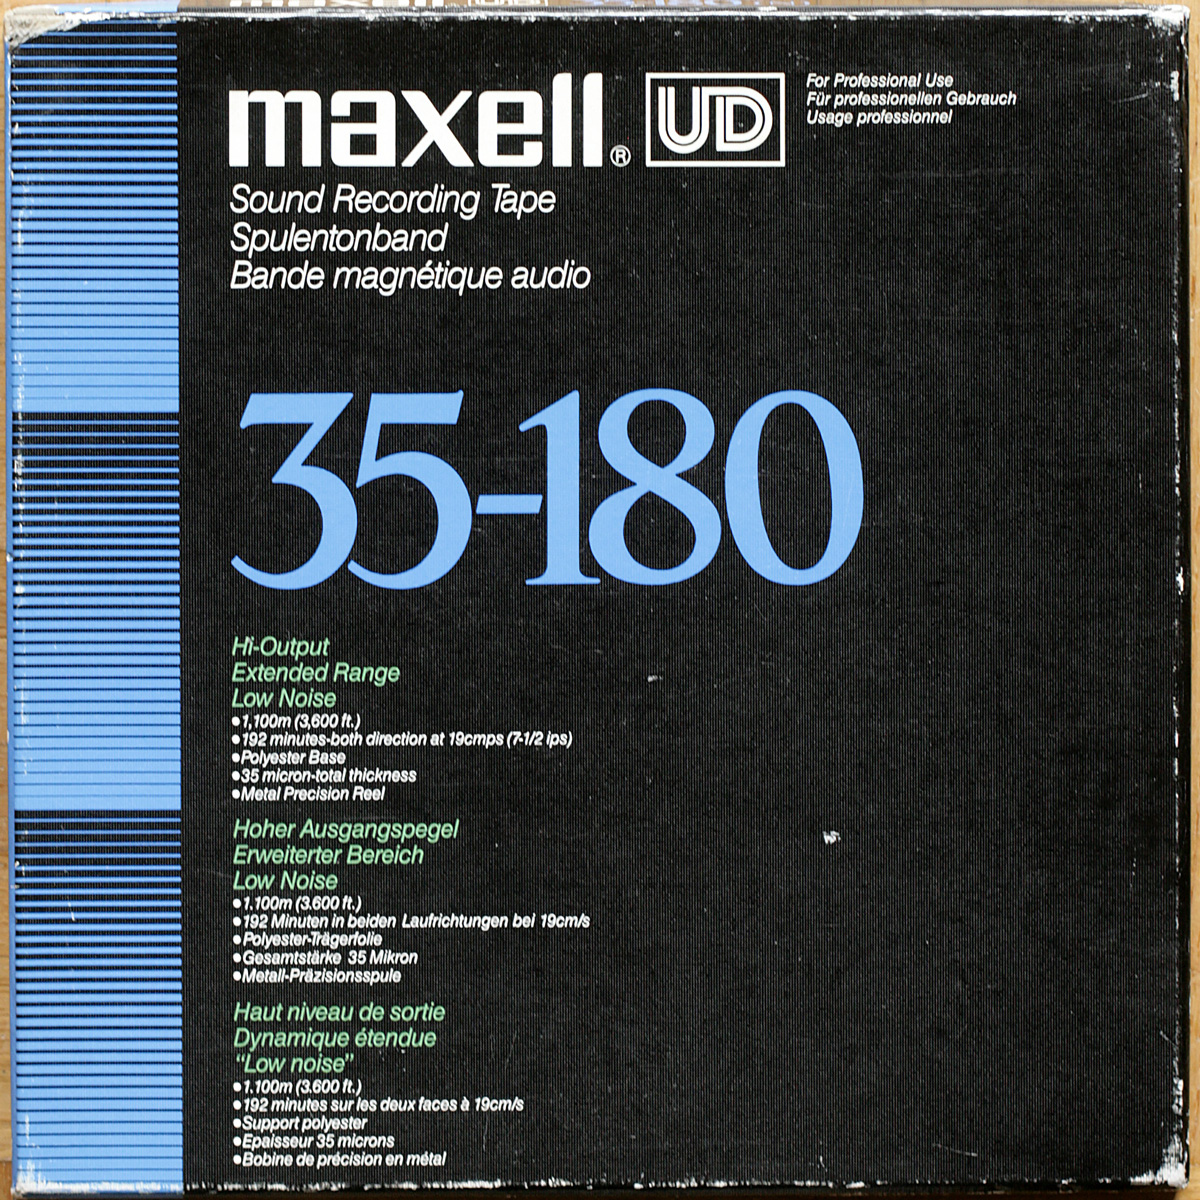 Maxell UD 35-180 (N) • Bande magnétique avec bobine métallique • Sound recording tape with metal reel • Spielband mit Metallspule • Ø 26.5 cm • NAB • Occasion • Used